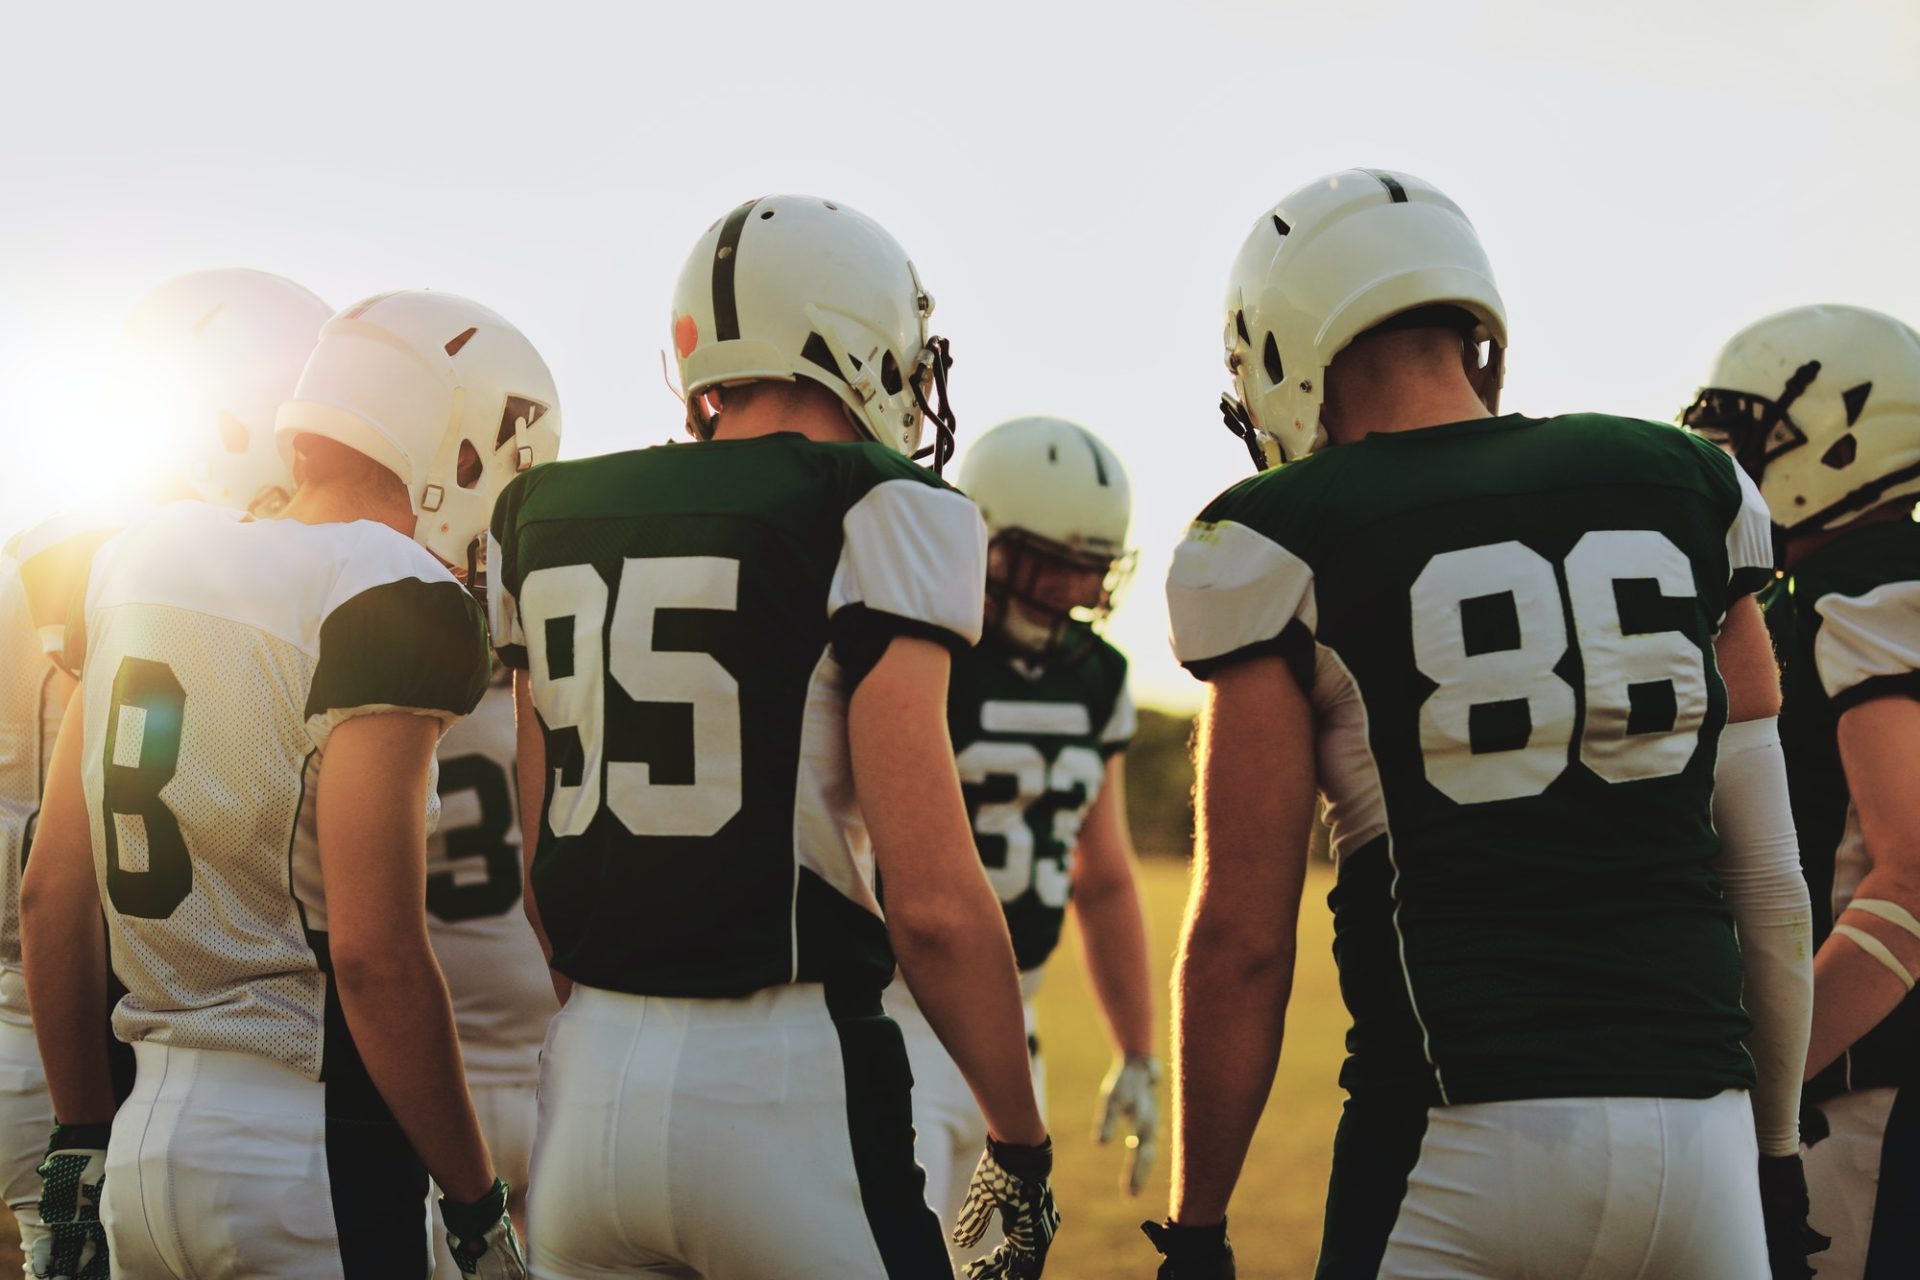 American football players standing in a huddle before a game